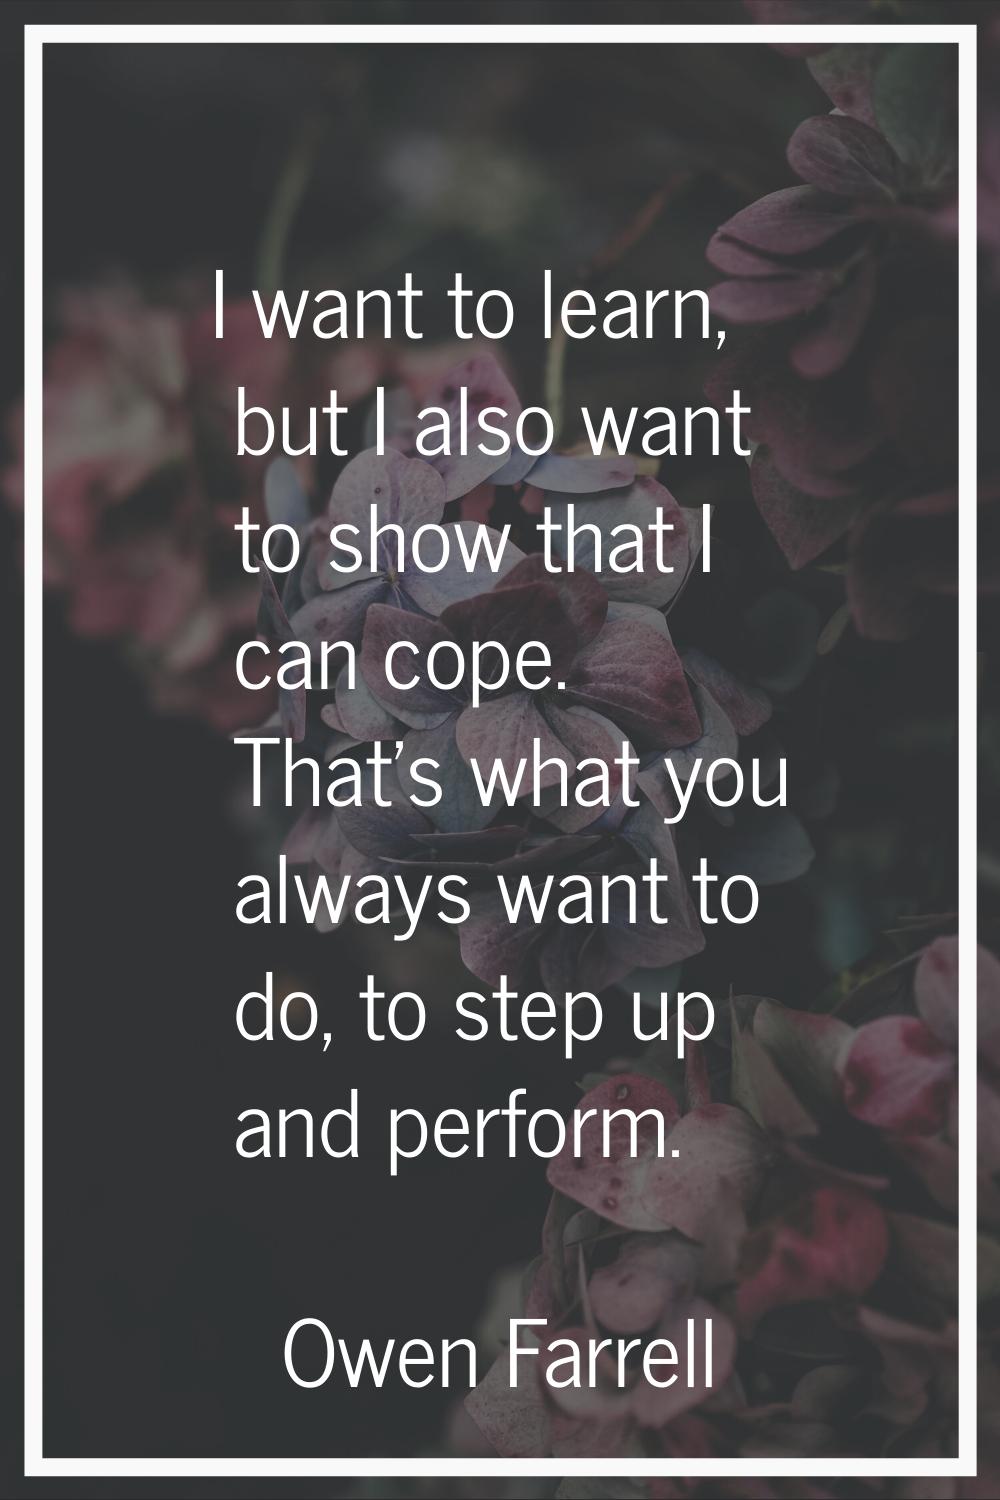 I want to learn, but I also want to show that I can cope. That's what you always want to do, to ste